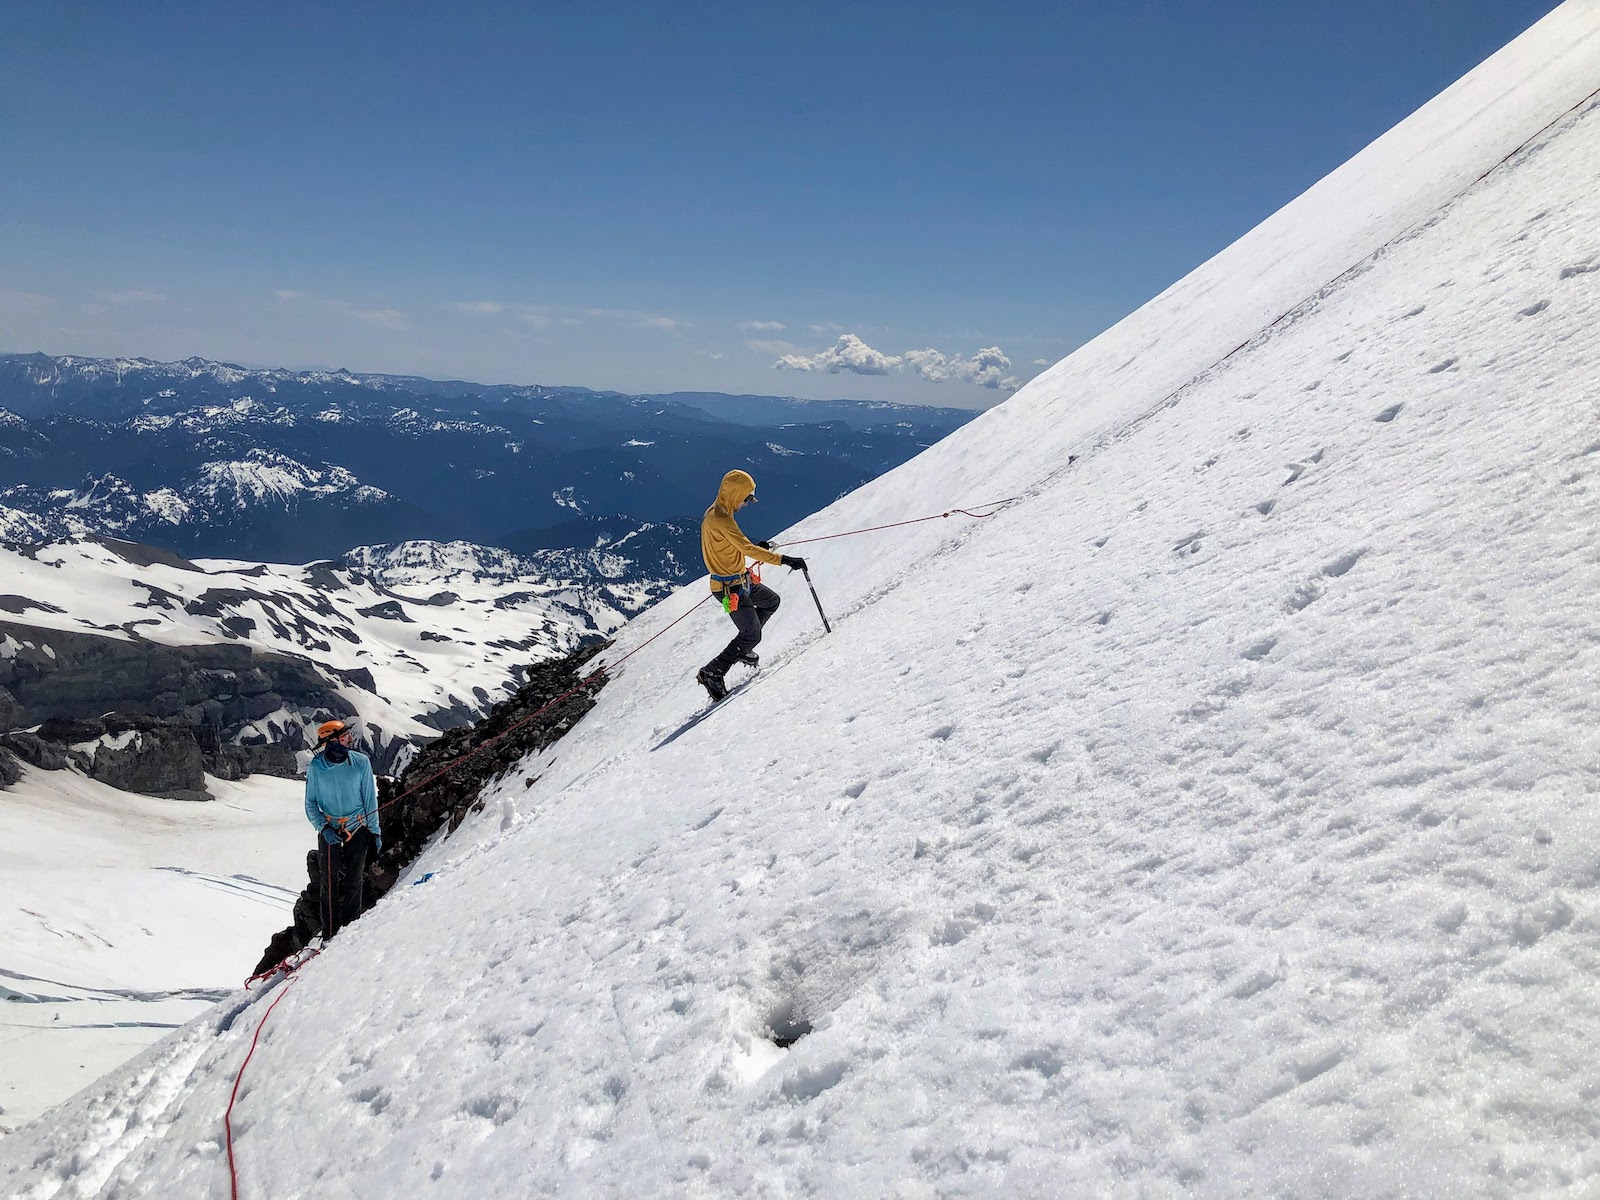 A climber ascending Muir peak from the Cowlitz glacier side on fixed rope with a guide watching from below